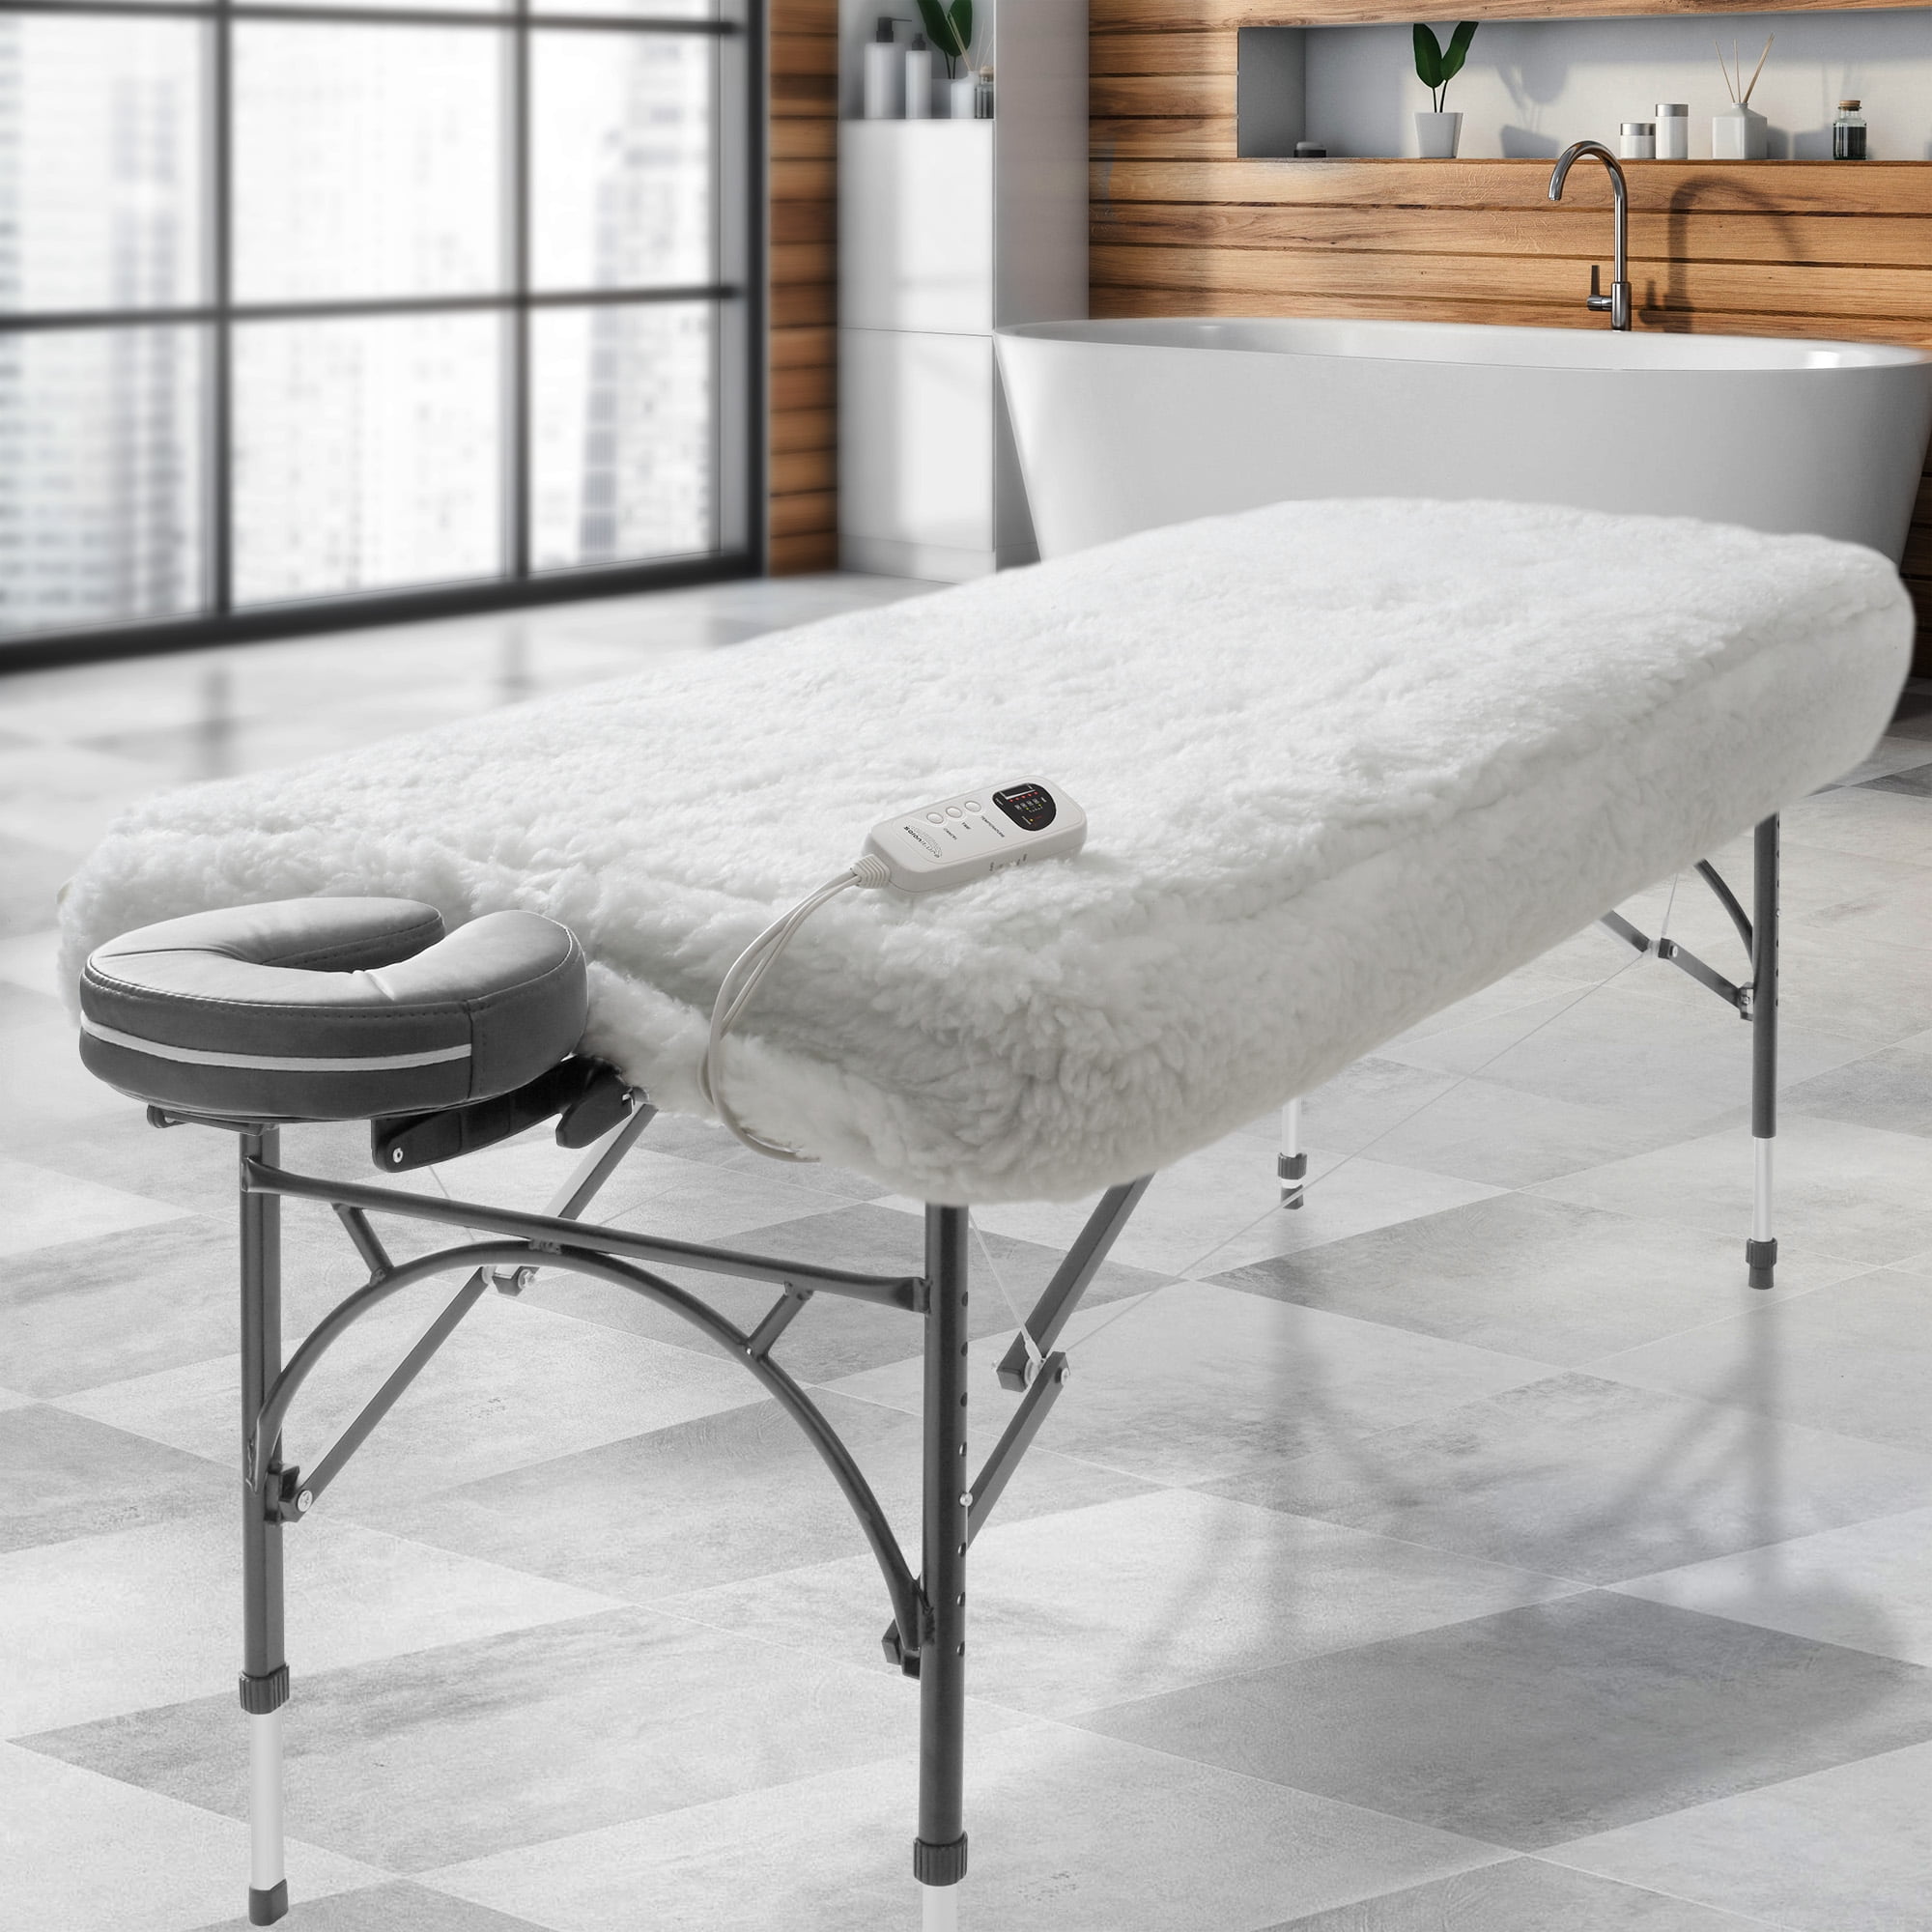 Deluxe Electric Massage Table Warmer Pad 30X73, Lierre.ca